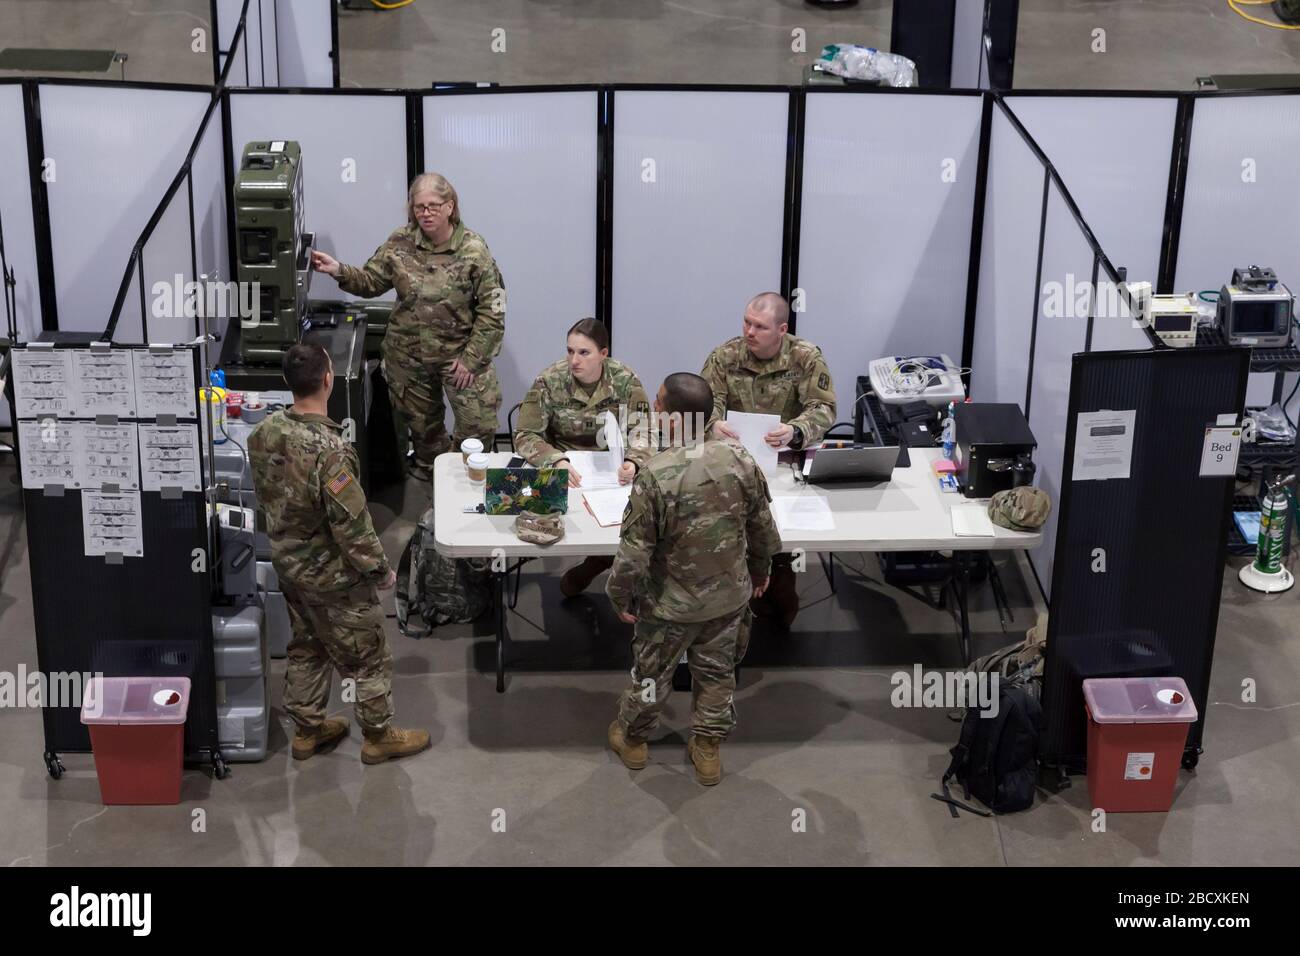 Soldiers are briefed at the field hospital in CenturyLink Field Event Center in Seattle on April 5, 2020. The mobile army surgical hospital, currently for non-COVID-19 cases, involves military medical personnel from multiple units, including the Soldiers from the 627th Hospital Center's 10th Field Hospital at Fort Carson, Colorado, the 62nd Medical Brigade from Joint Base Lewis-McChord, Washington and others. Officials said that he hospital is now ready to accept patients. Stock Photo